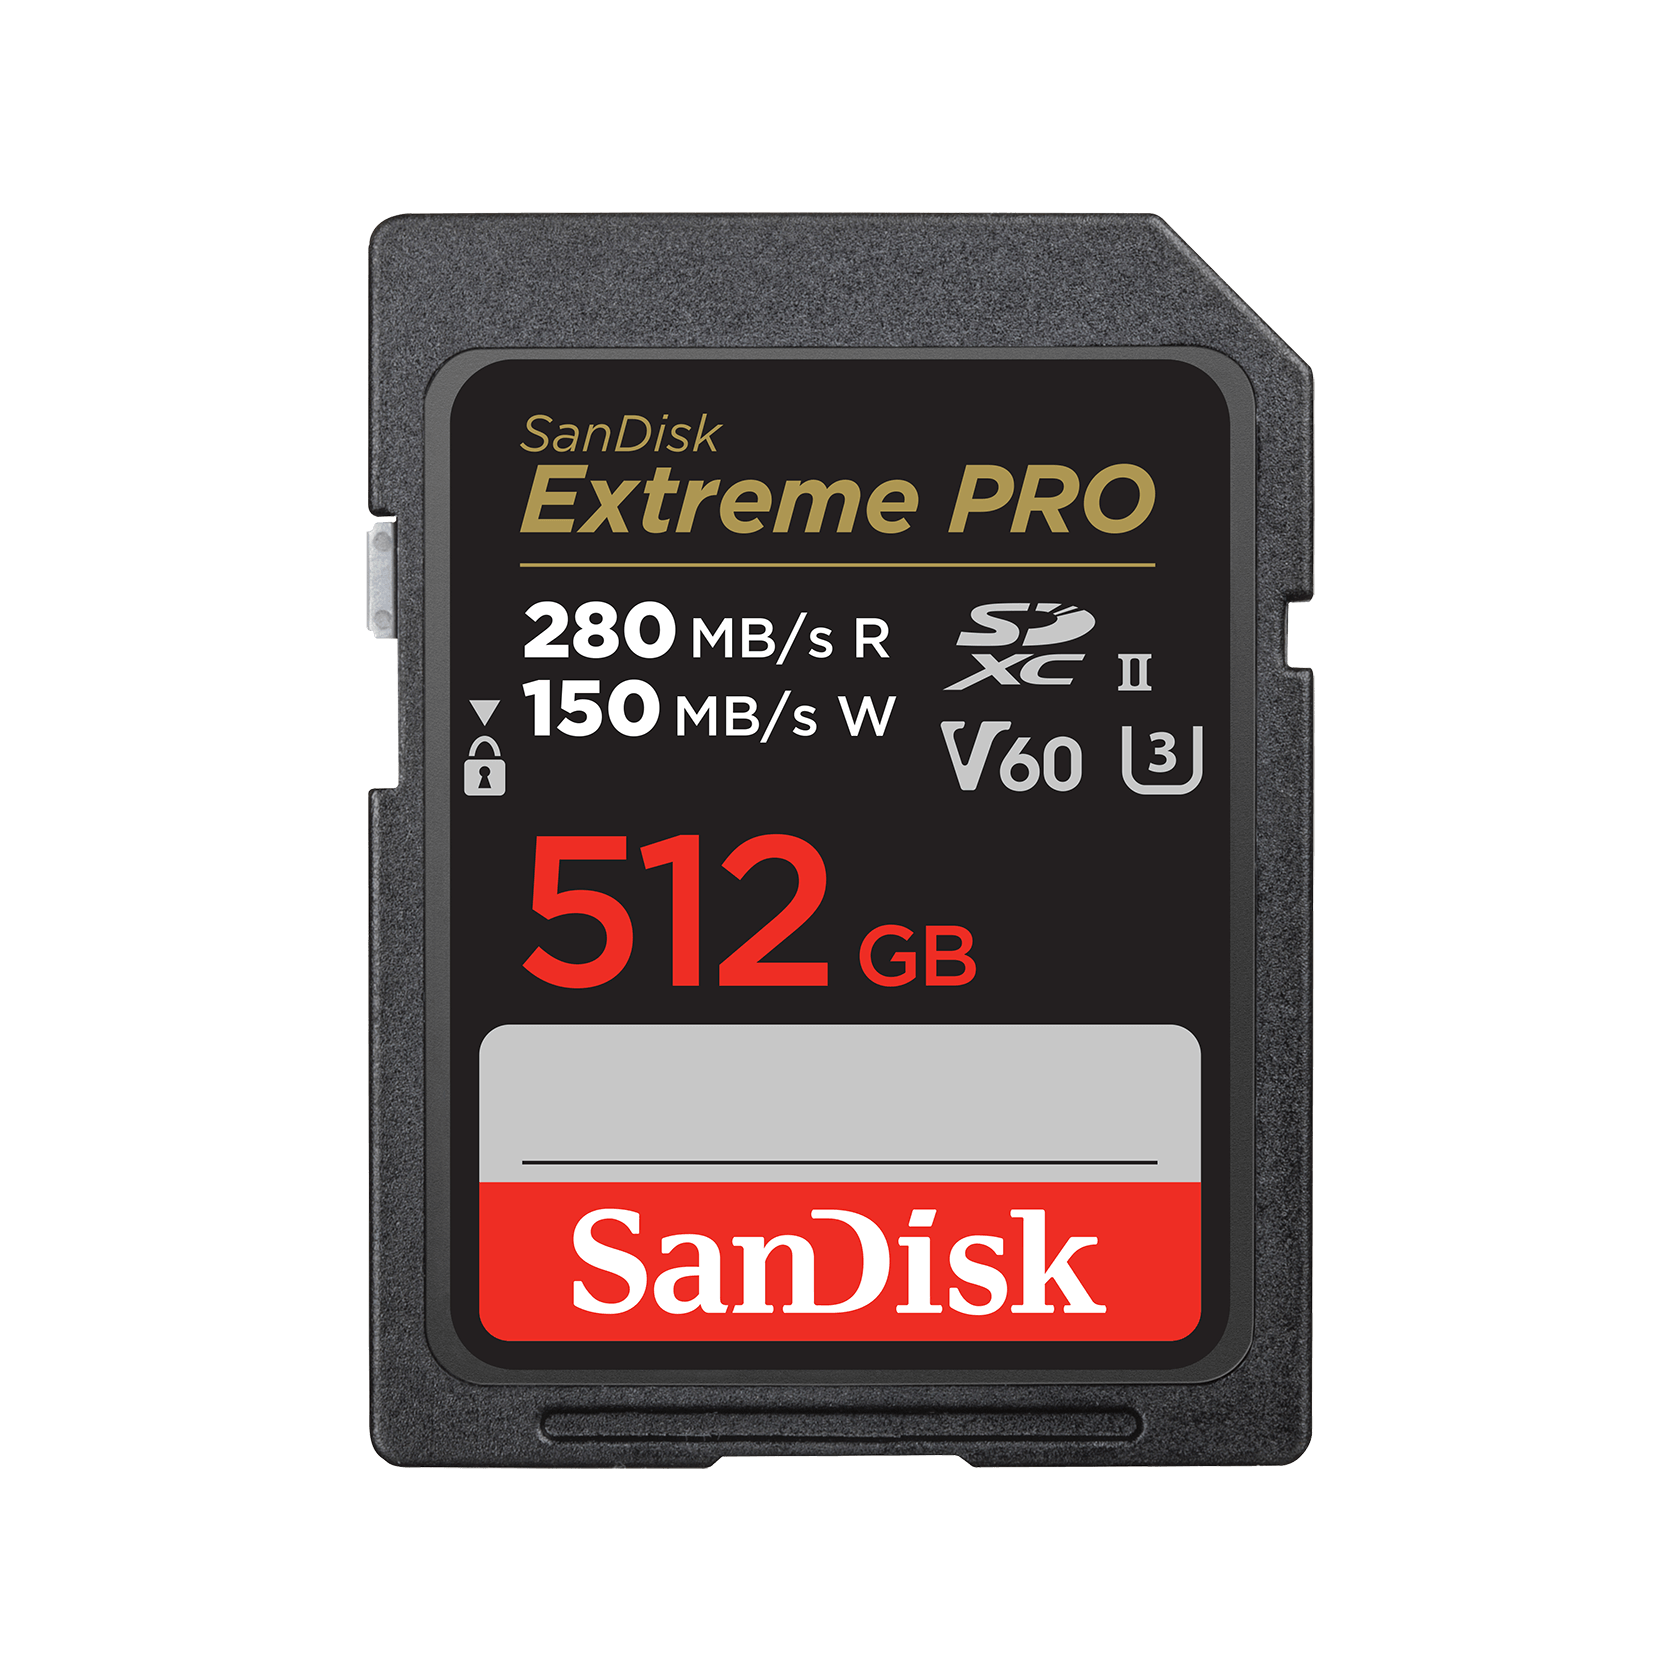 SanDisk Extreme PRO SDXCâ„¢ UHS-II Memory Card - 512GB - SDSDXEP-512G-GN4IN